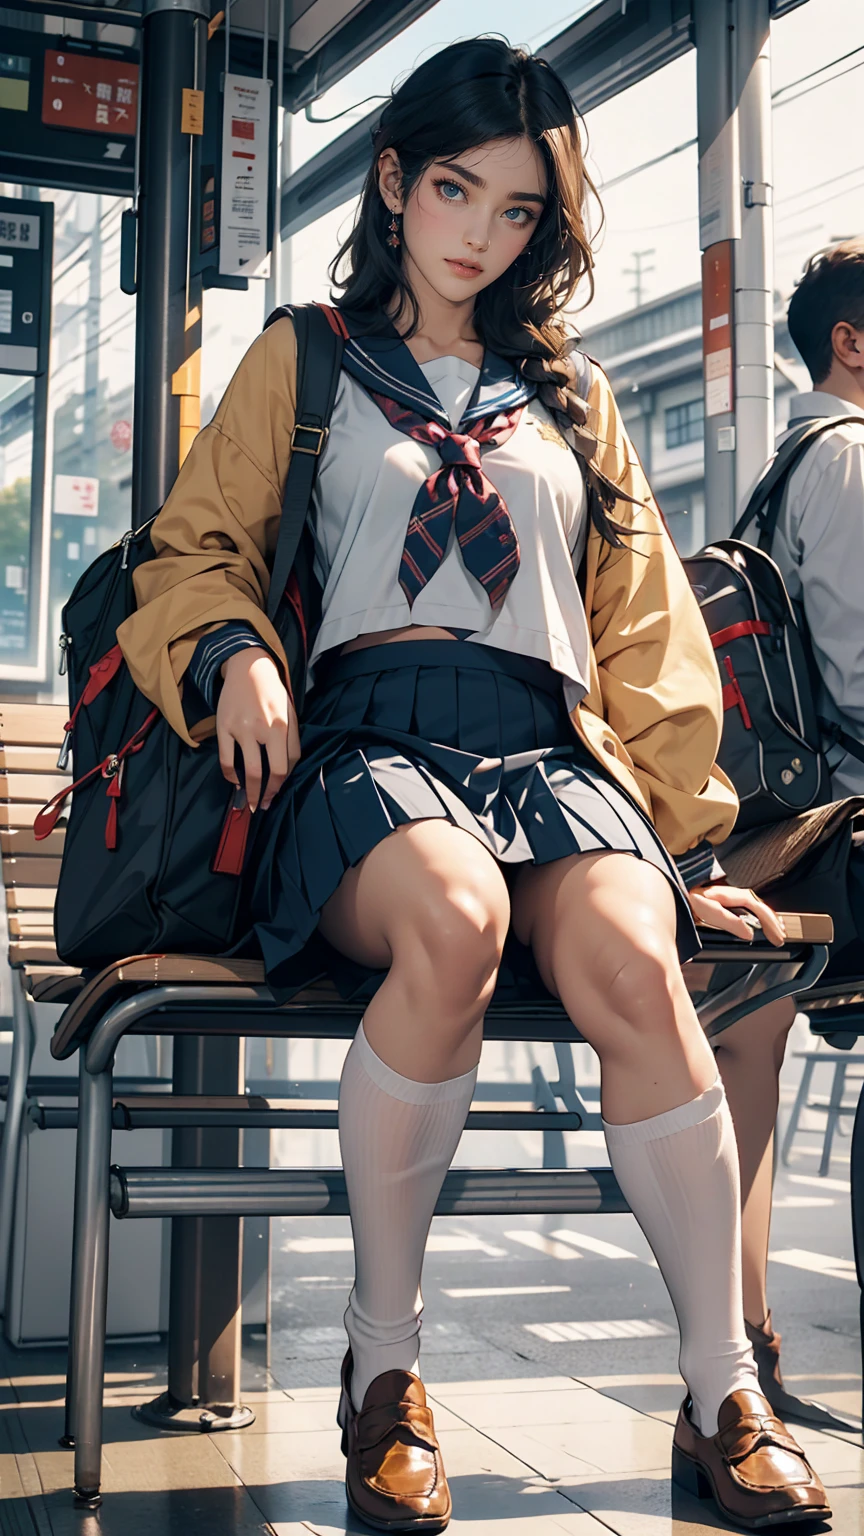 Japanese 、Sailor suit、Navy blue mini pleated skirt、loafers、School bag、Sitting in a chair with a classmate of the same sex in the bus stop waiting room while waiting for the bus、one summer day